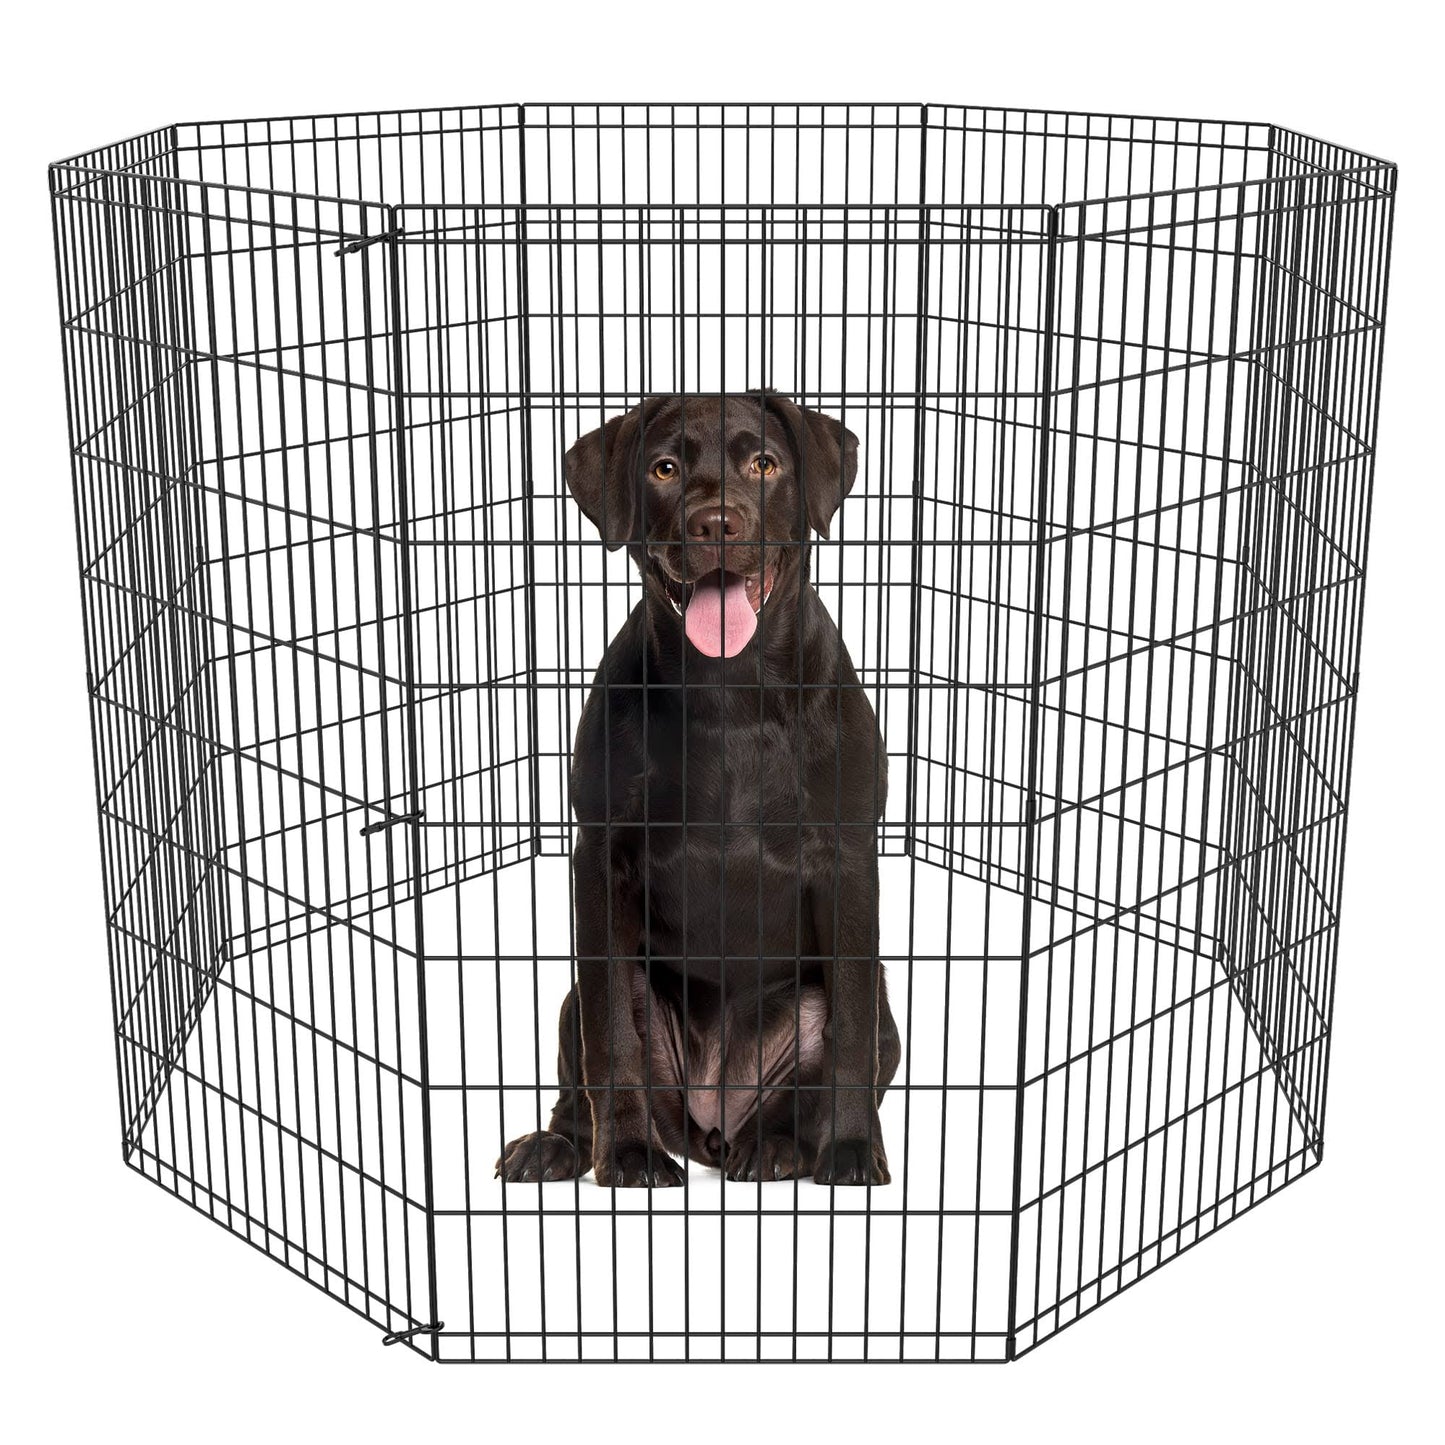 Pet Republic 2430364248 Inch Pet Playpen Puppy Playpen Dog Exercise Pen Indoor Outdoor Folding Dog Fence for Small Animals 8 Panel